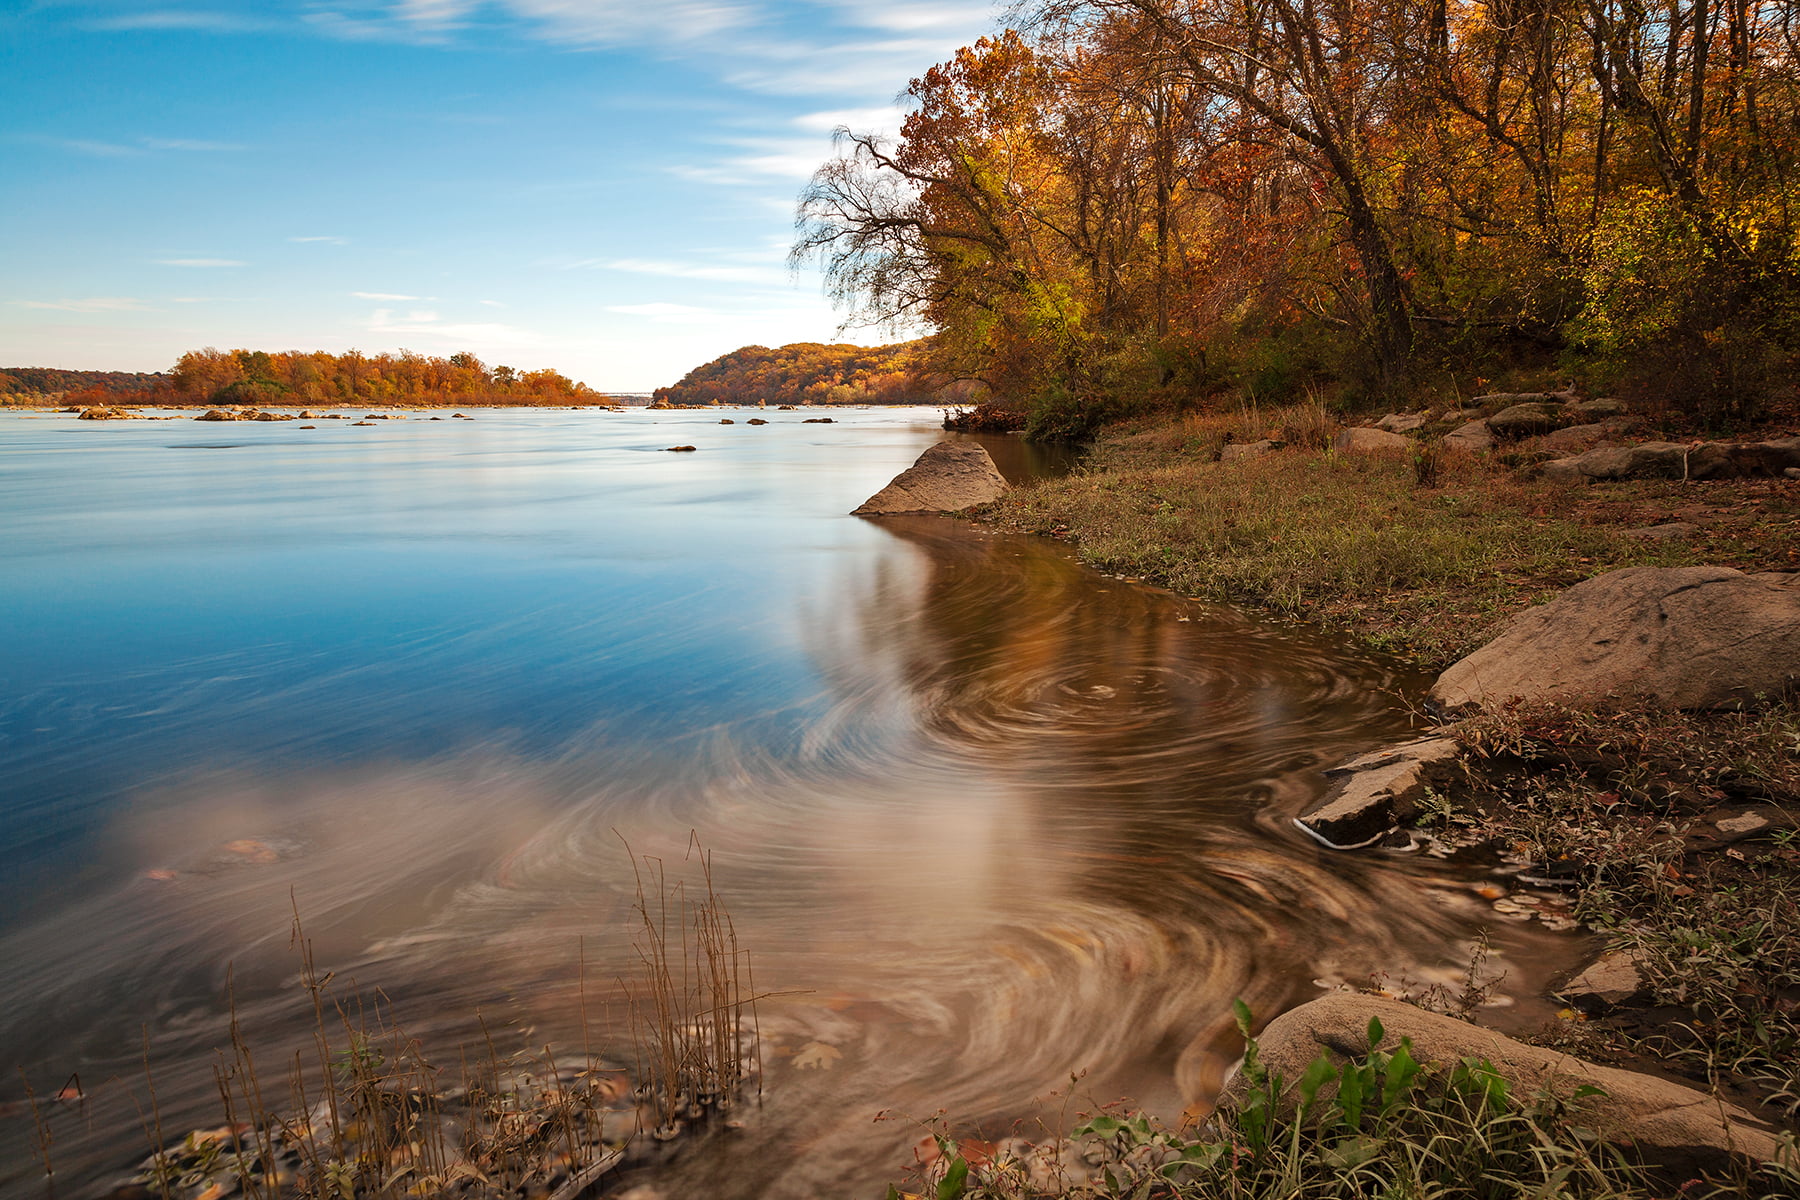 trees beside body of water under blue sky during daytime, susquehanna river, susquehanna river